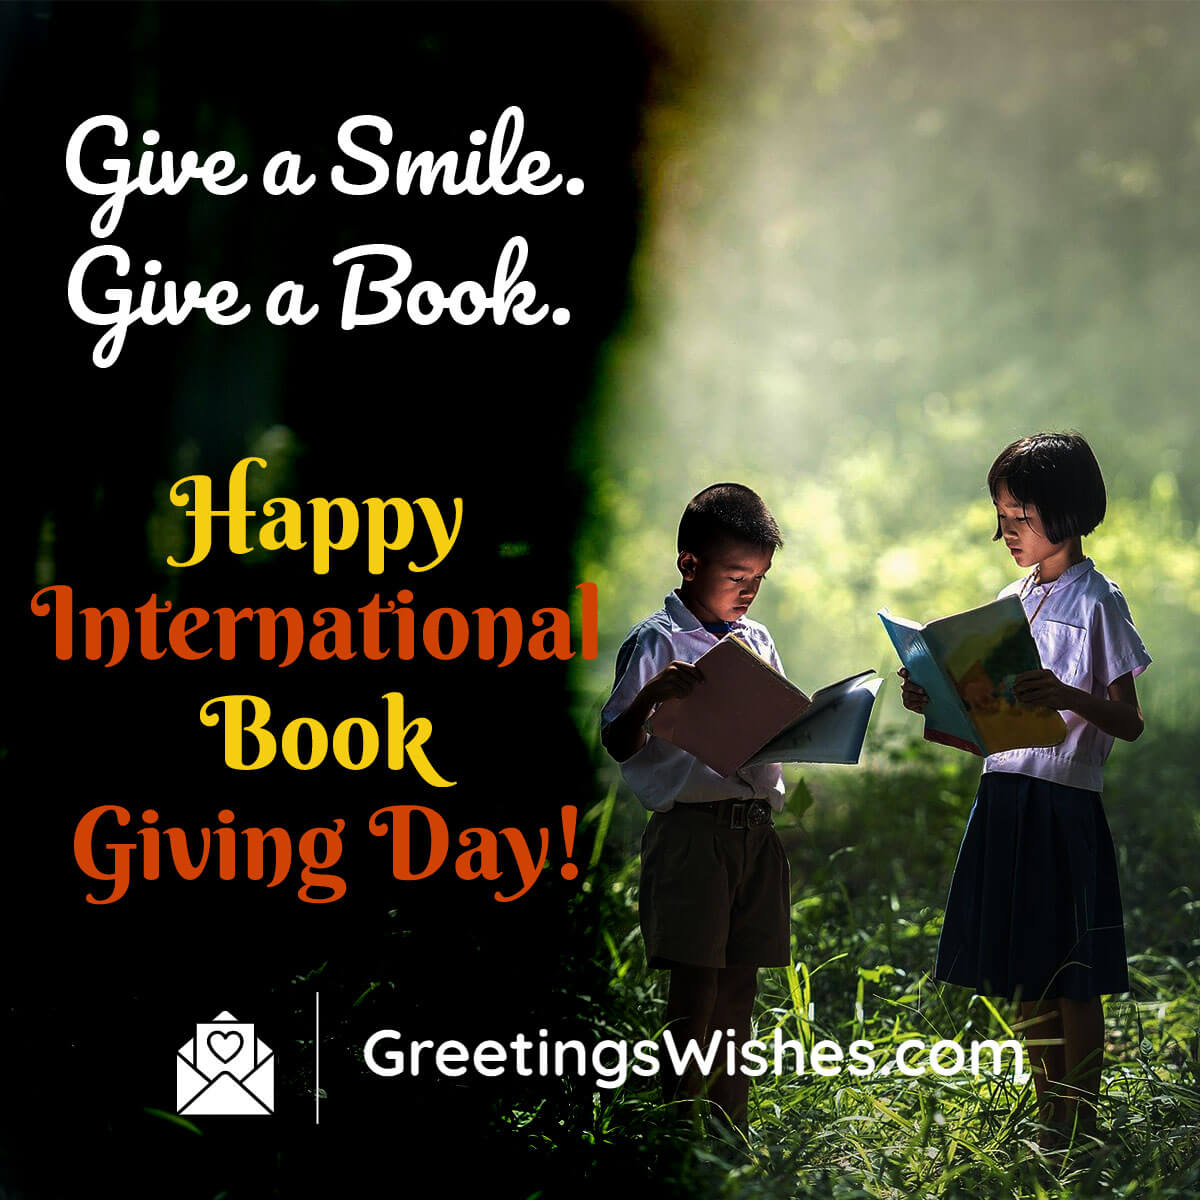 International Book Giving Day Wishes (14th February) Greetings Wishes